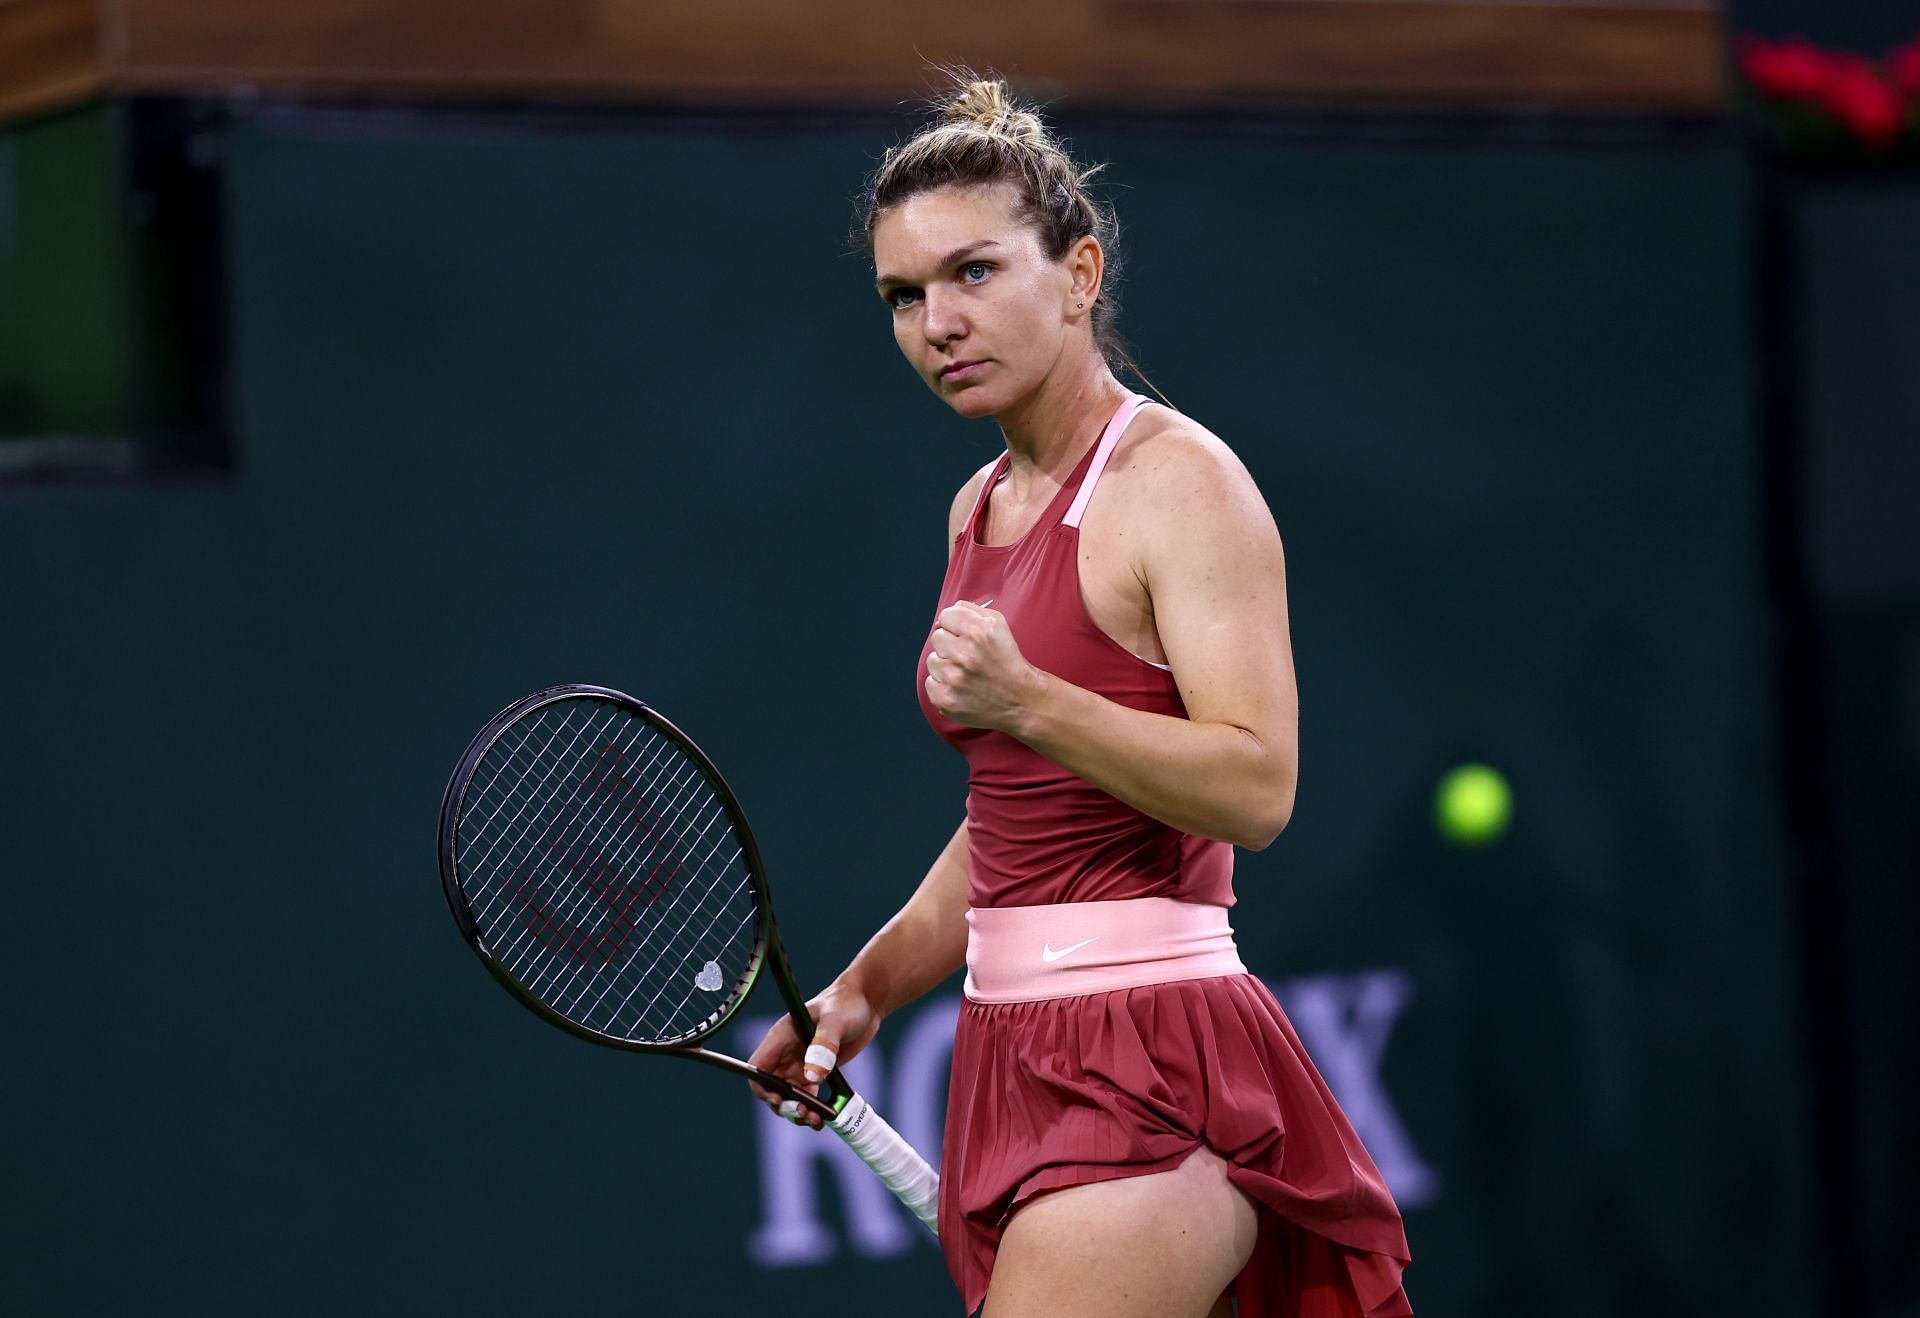 Simona Halep at the 2022 Indian Wells Open.